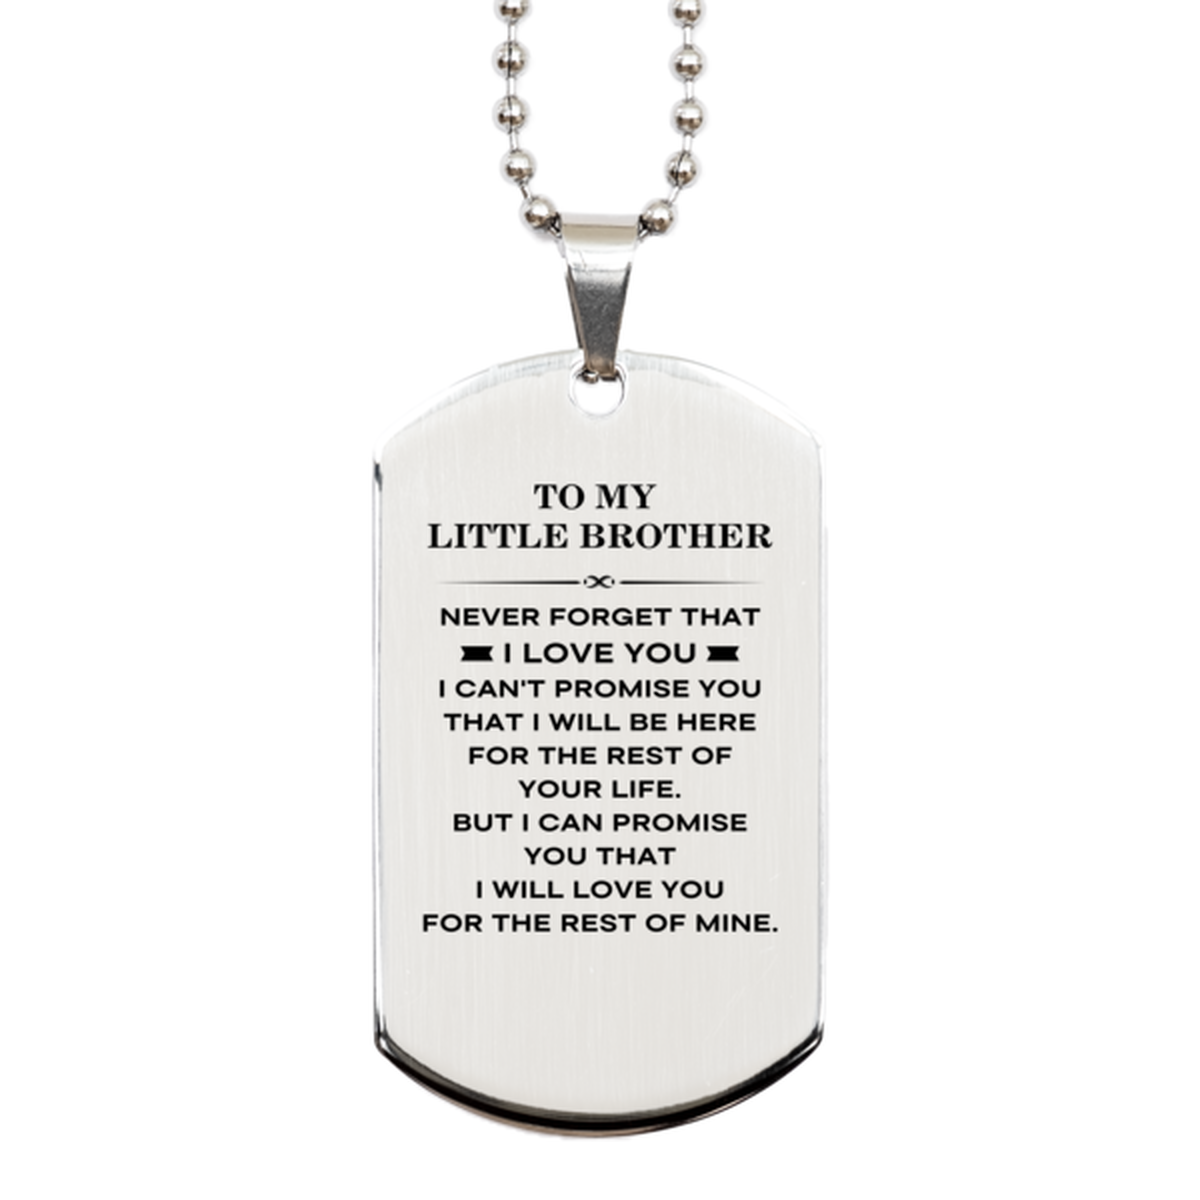 To My Little Brother Gifts, I will love you for the rest of mine, Love Little Brother Dog Tag Necklace, Birthday Christmas Unique Silver Dog Tag For Little Brother